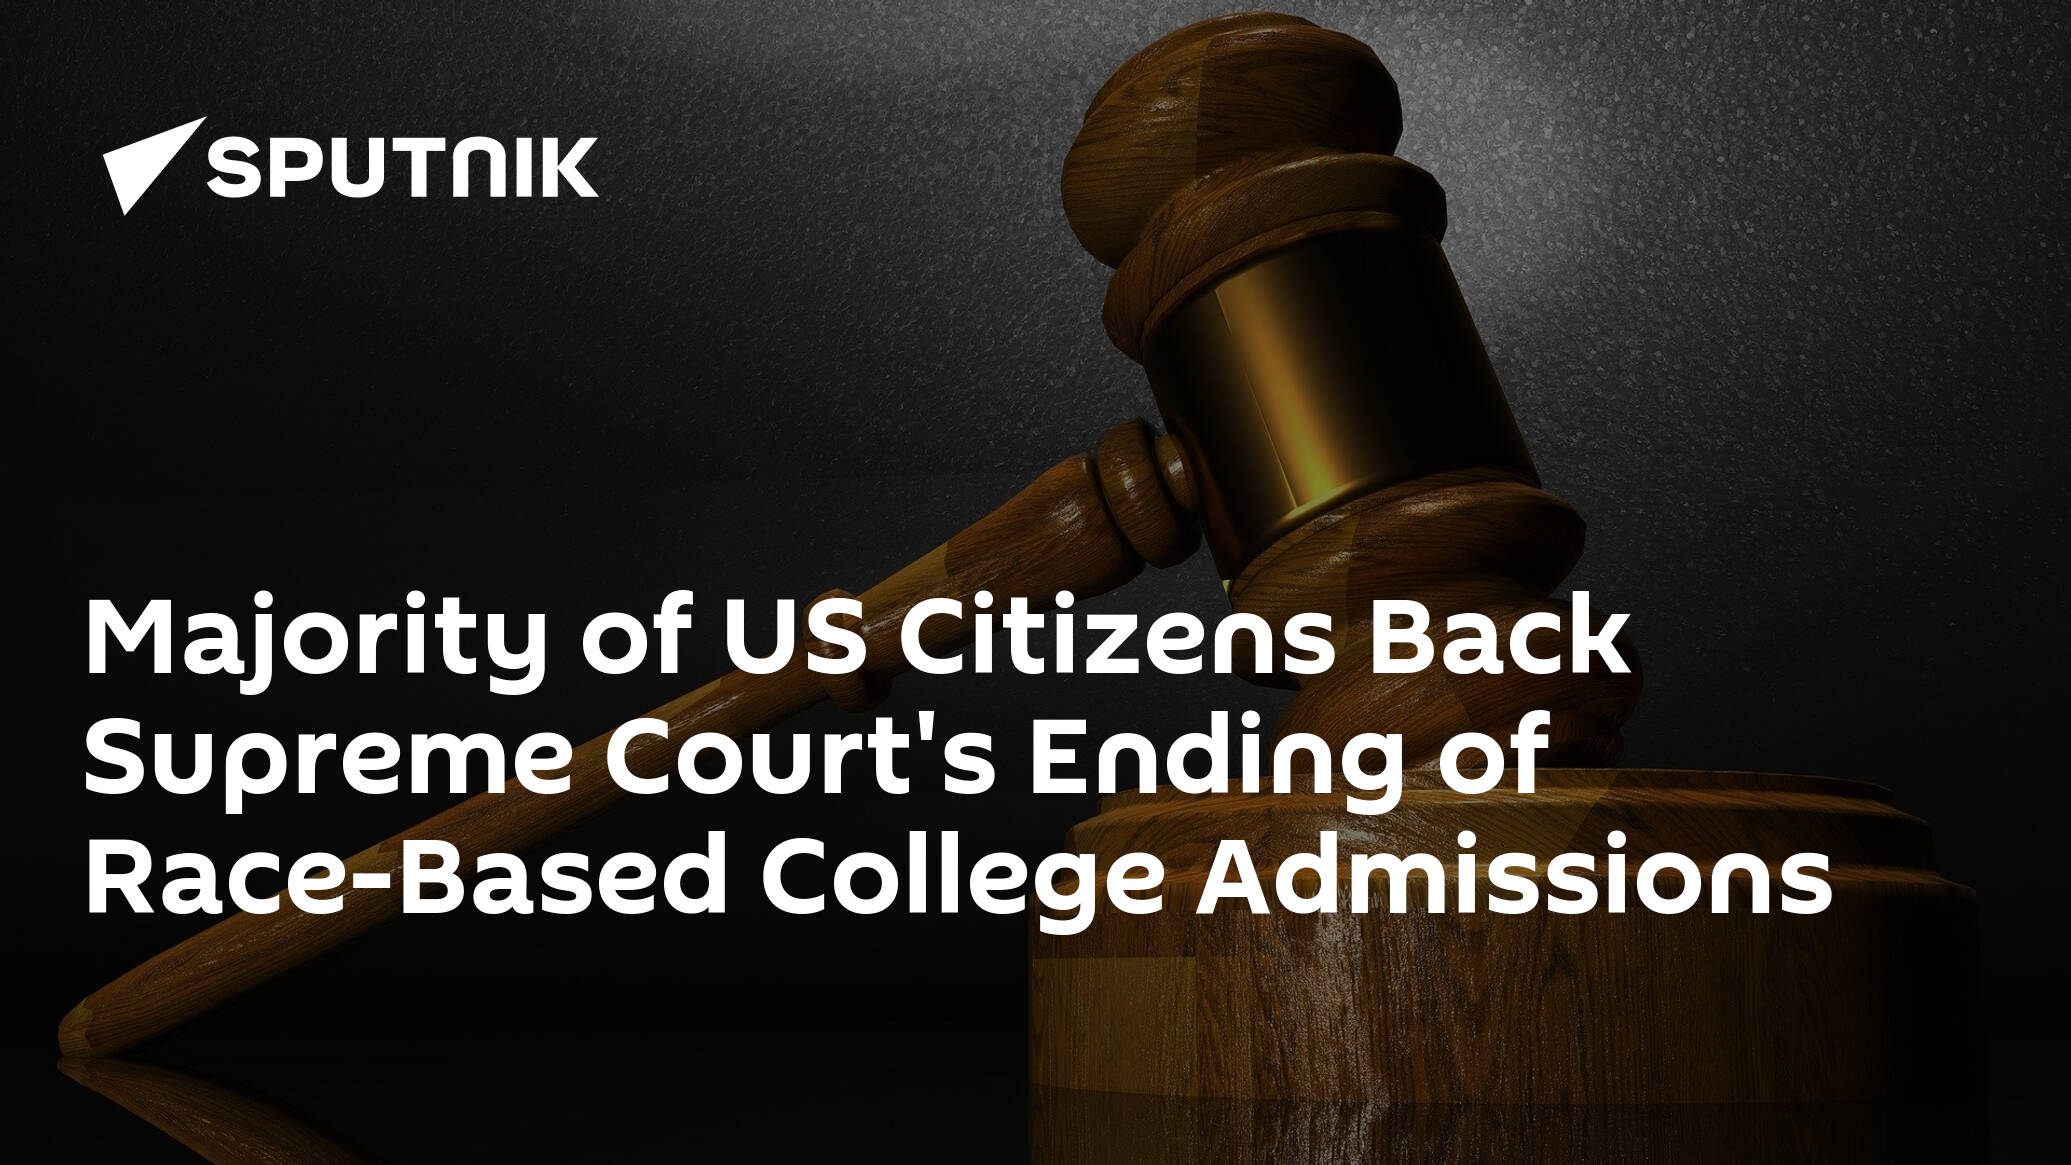 Majority of US Citizens Back Supreme Court's Ending of Race-Based College Admissions